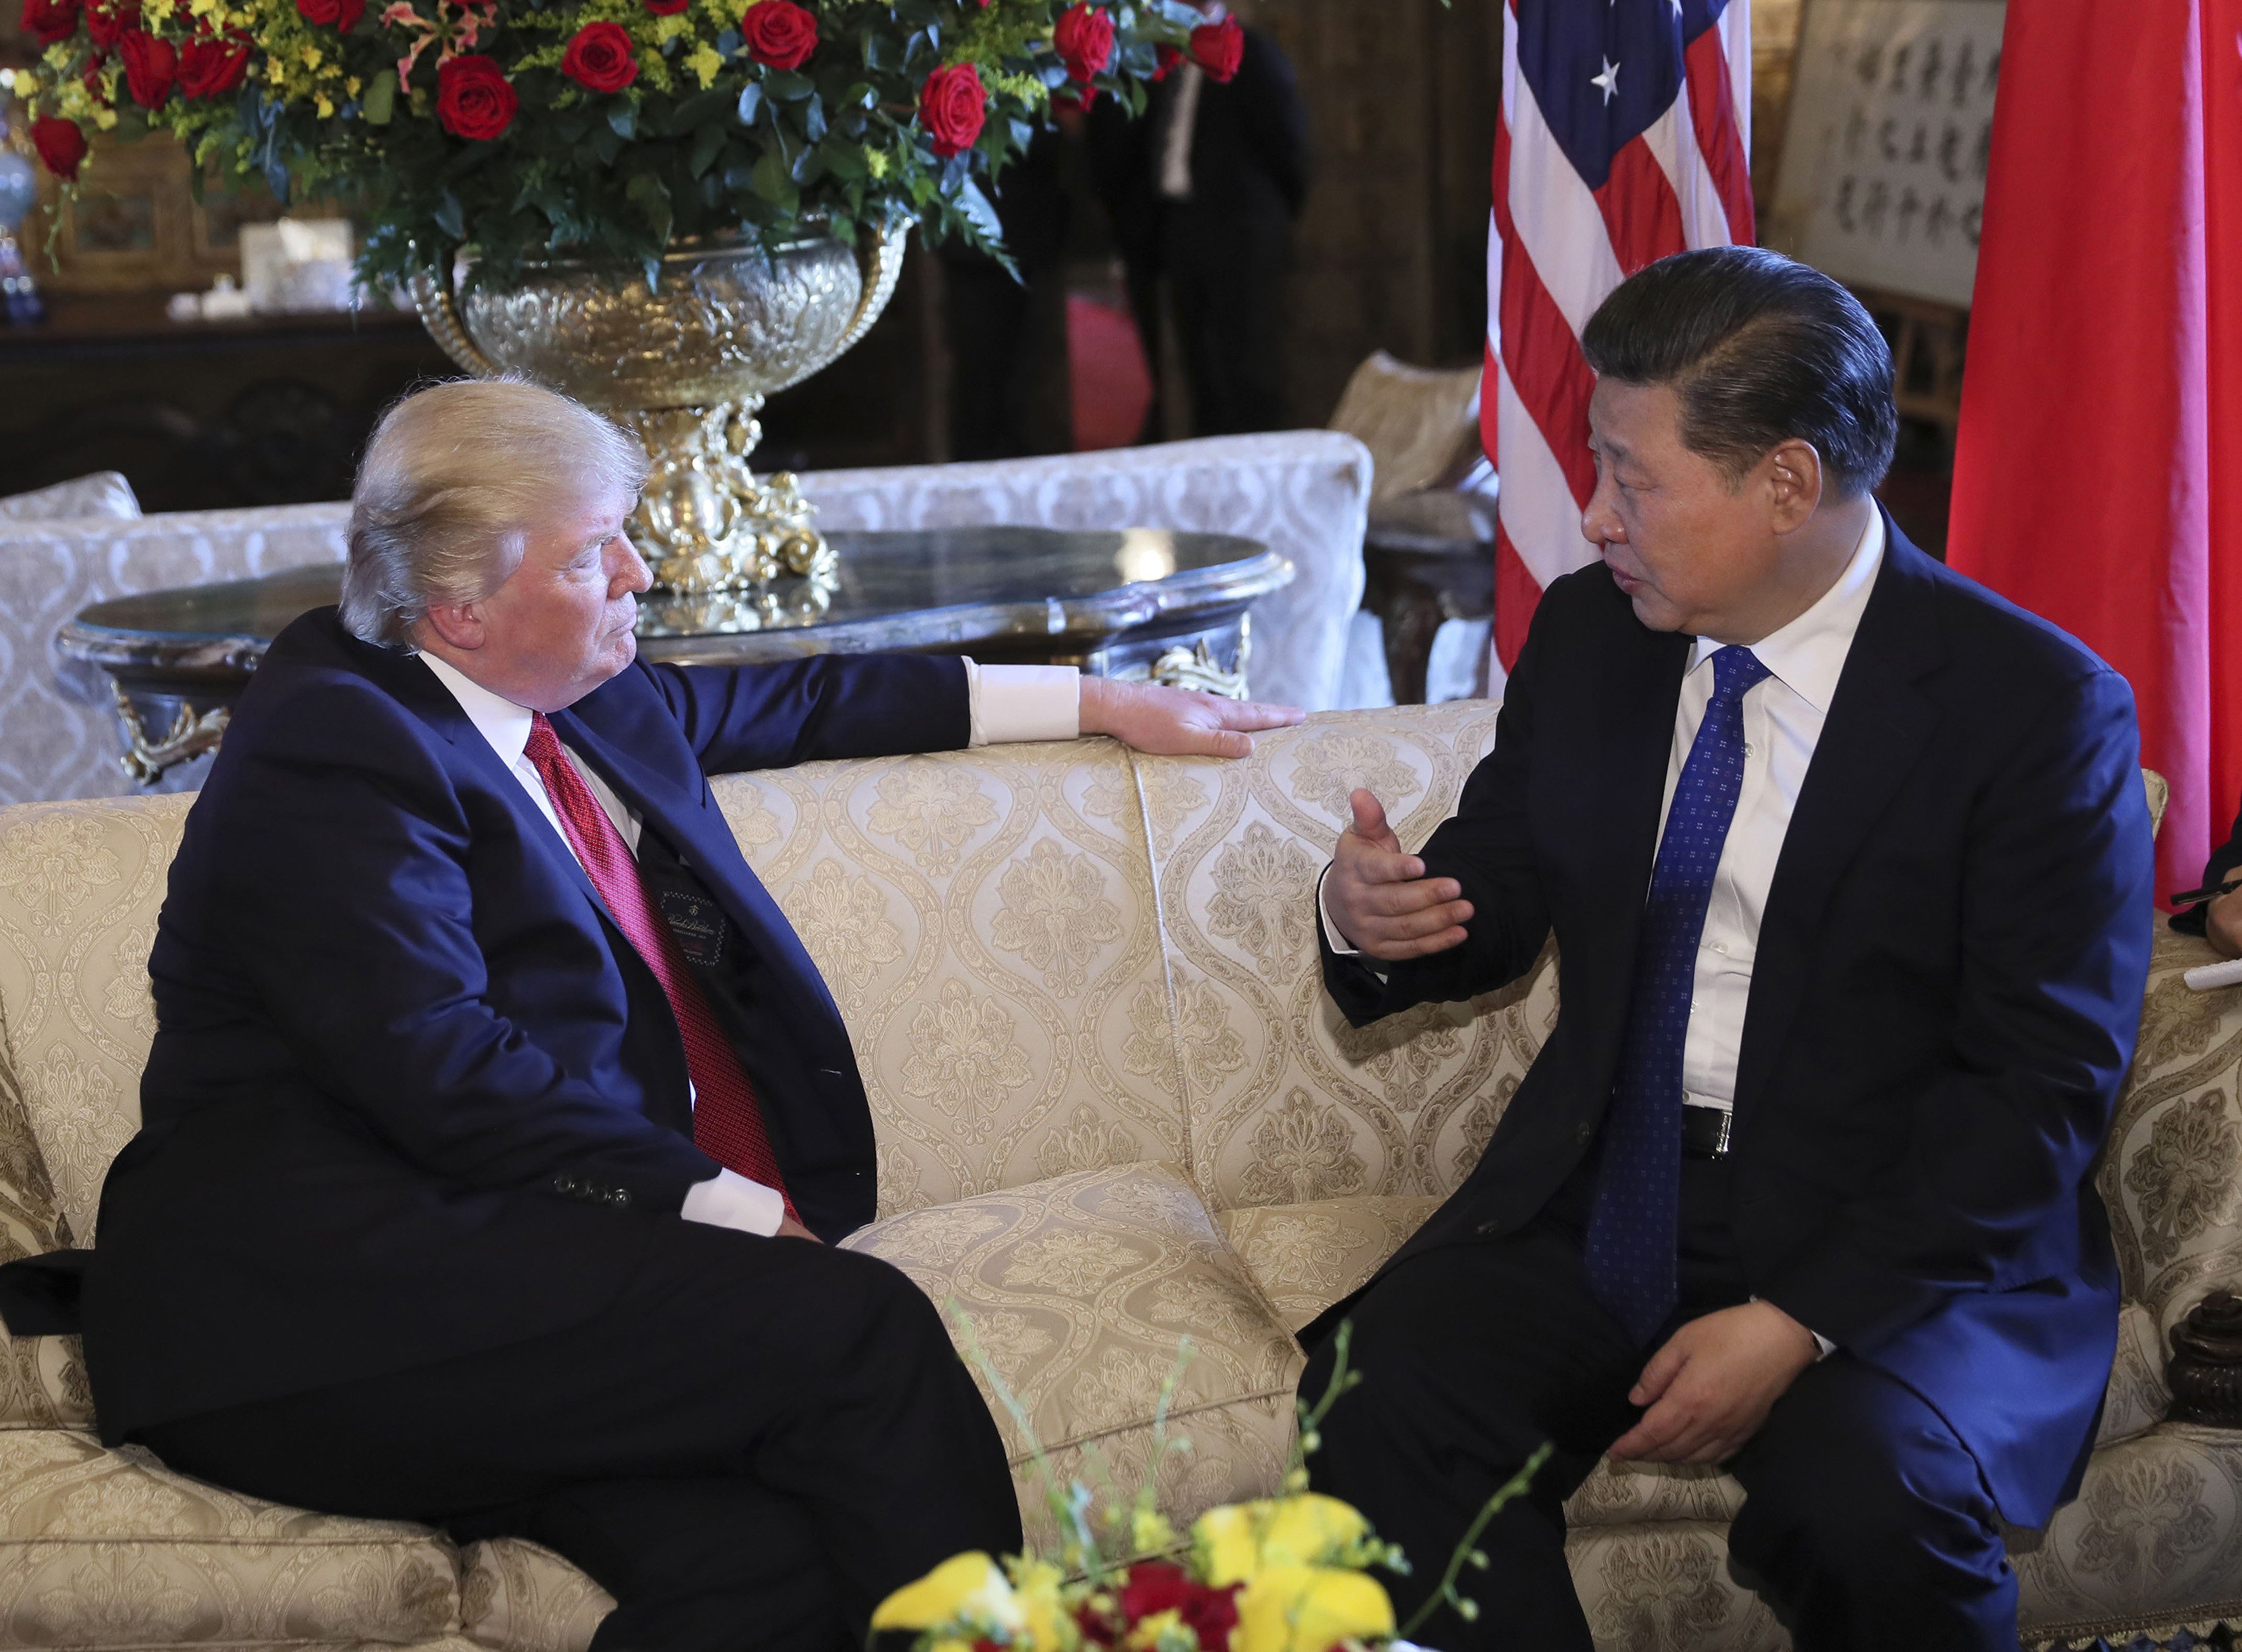 Time will tell how American trade tariffs affect the relationship between US President Donald Trump and President Xi Jinping. Photo: Xinhua